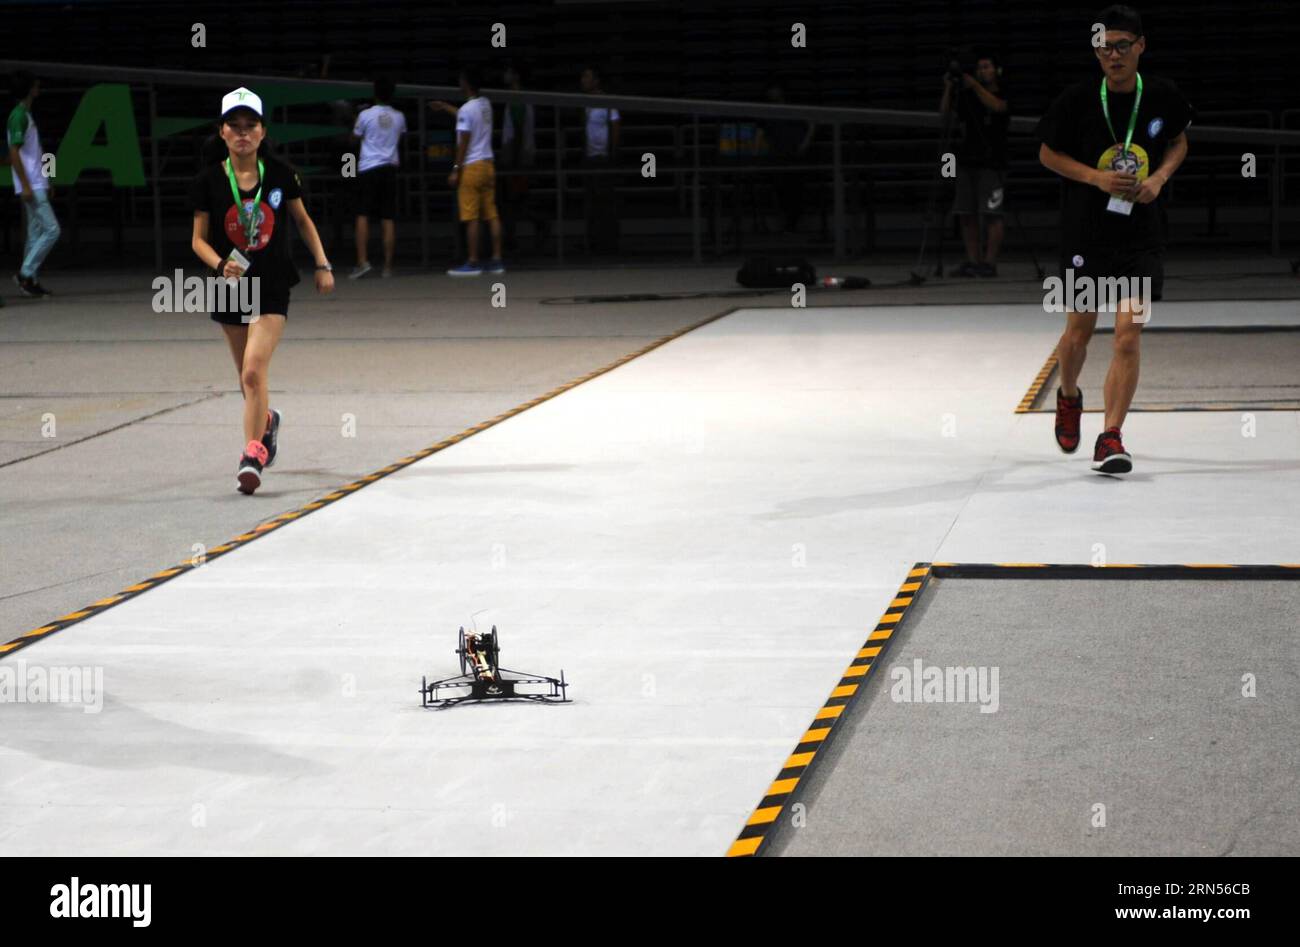 (150615) -- BEIJING, June 15, 2015 -- Competitors control their elastic model car during the competition in Beijing, capital of China, June 15, 2015. The 2015 Formula-E China Design Championship was held at Beijing University of Technology on Monday. Thirty-five teams from fourteen universities in China competed for the opportunity to attend the global final held in Los Angeles in August. ) (zkr) CHINA-BEIJING-FORMULA-E DESIGN CHAMPIONSHIP(CN) LiuxYongzhen PUBLICATIONxNOTxINxCHN   Beijing June 15 2015 Competitors Control their Elastic Model Car during The Competition in Beijing Capital of Chin Stock Photo